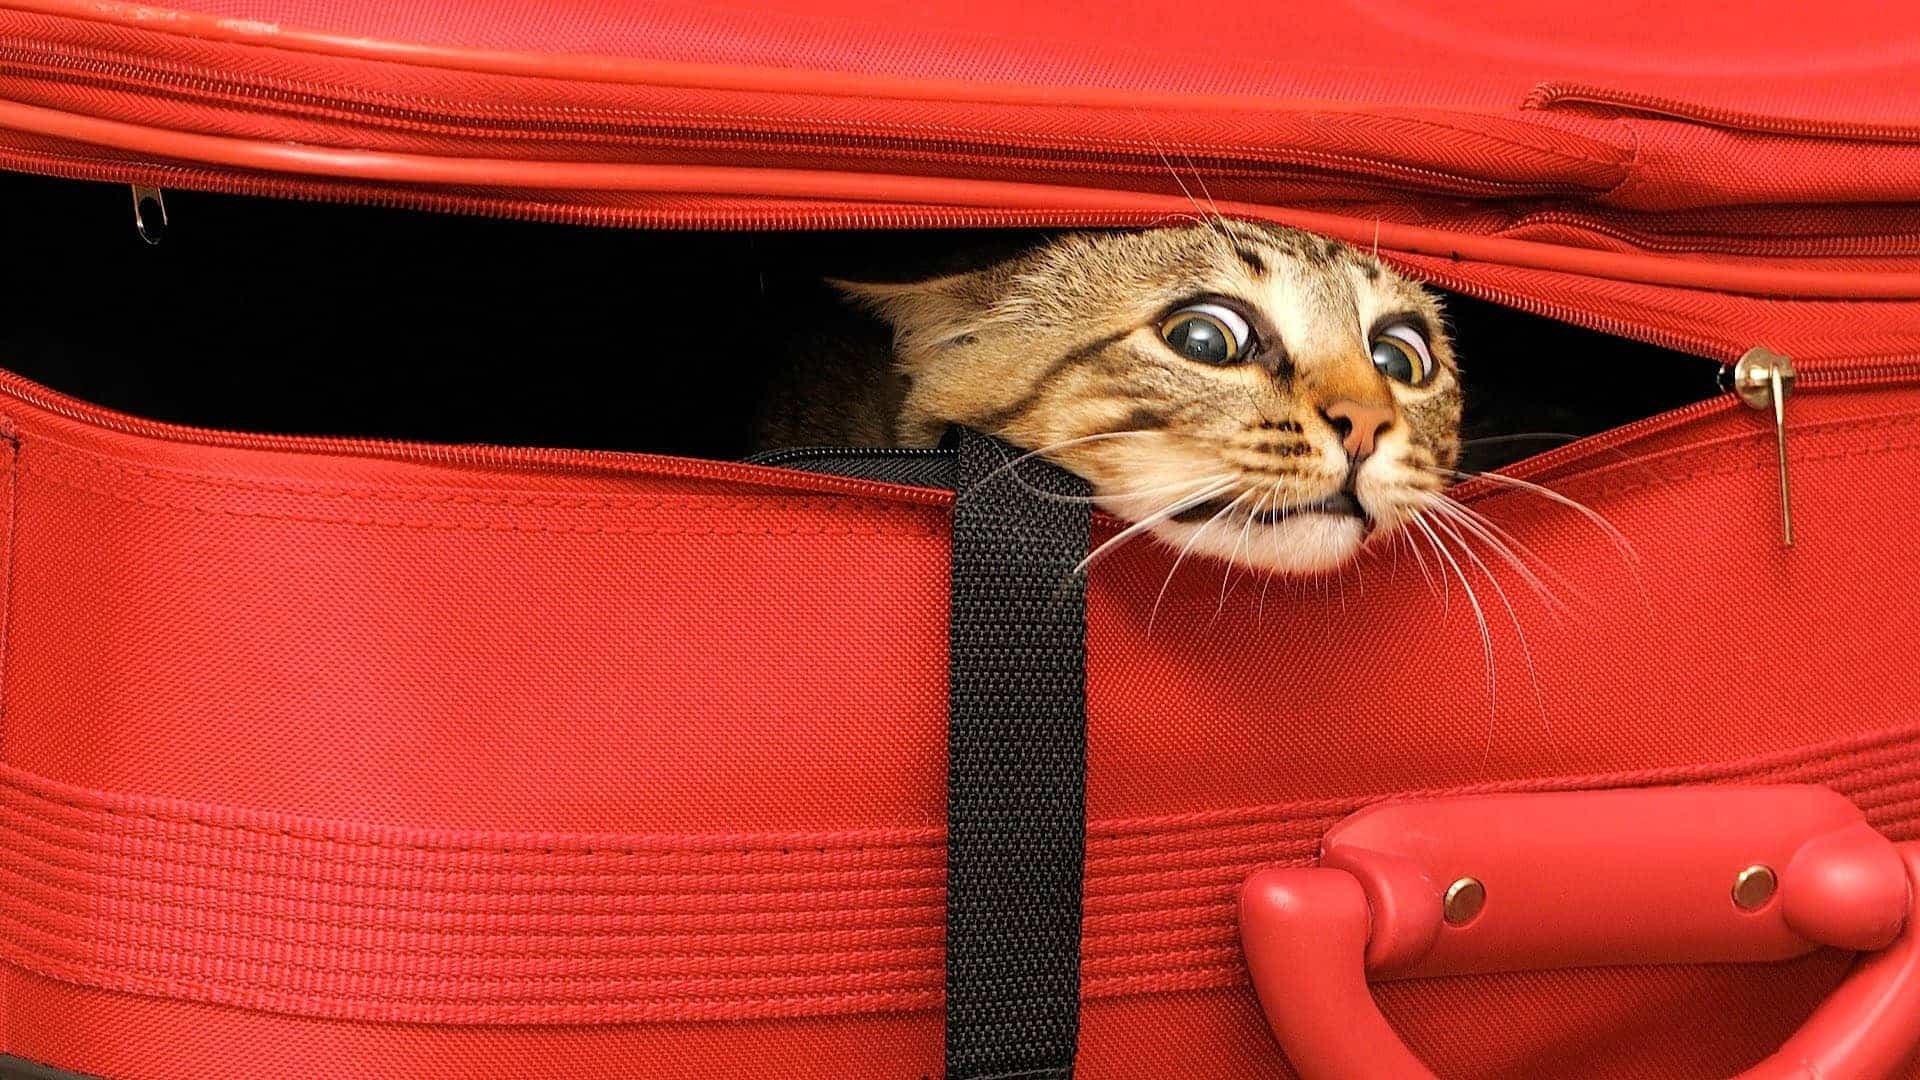 cat doesn't travel well